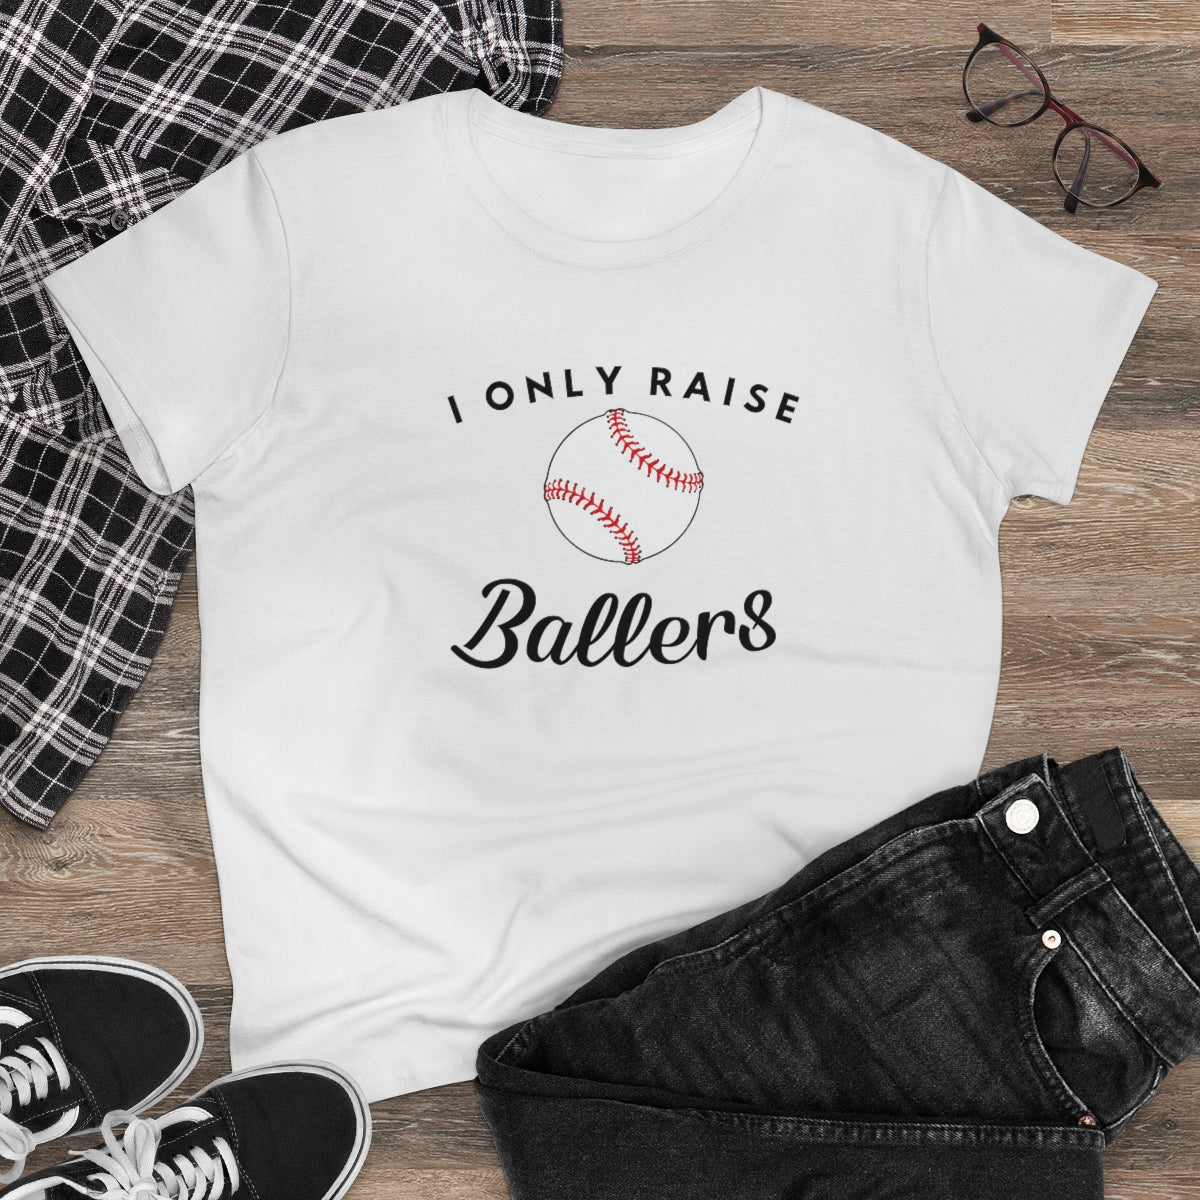 I only Raise (Base)Ballers - Ladies Tee